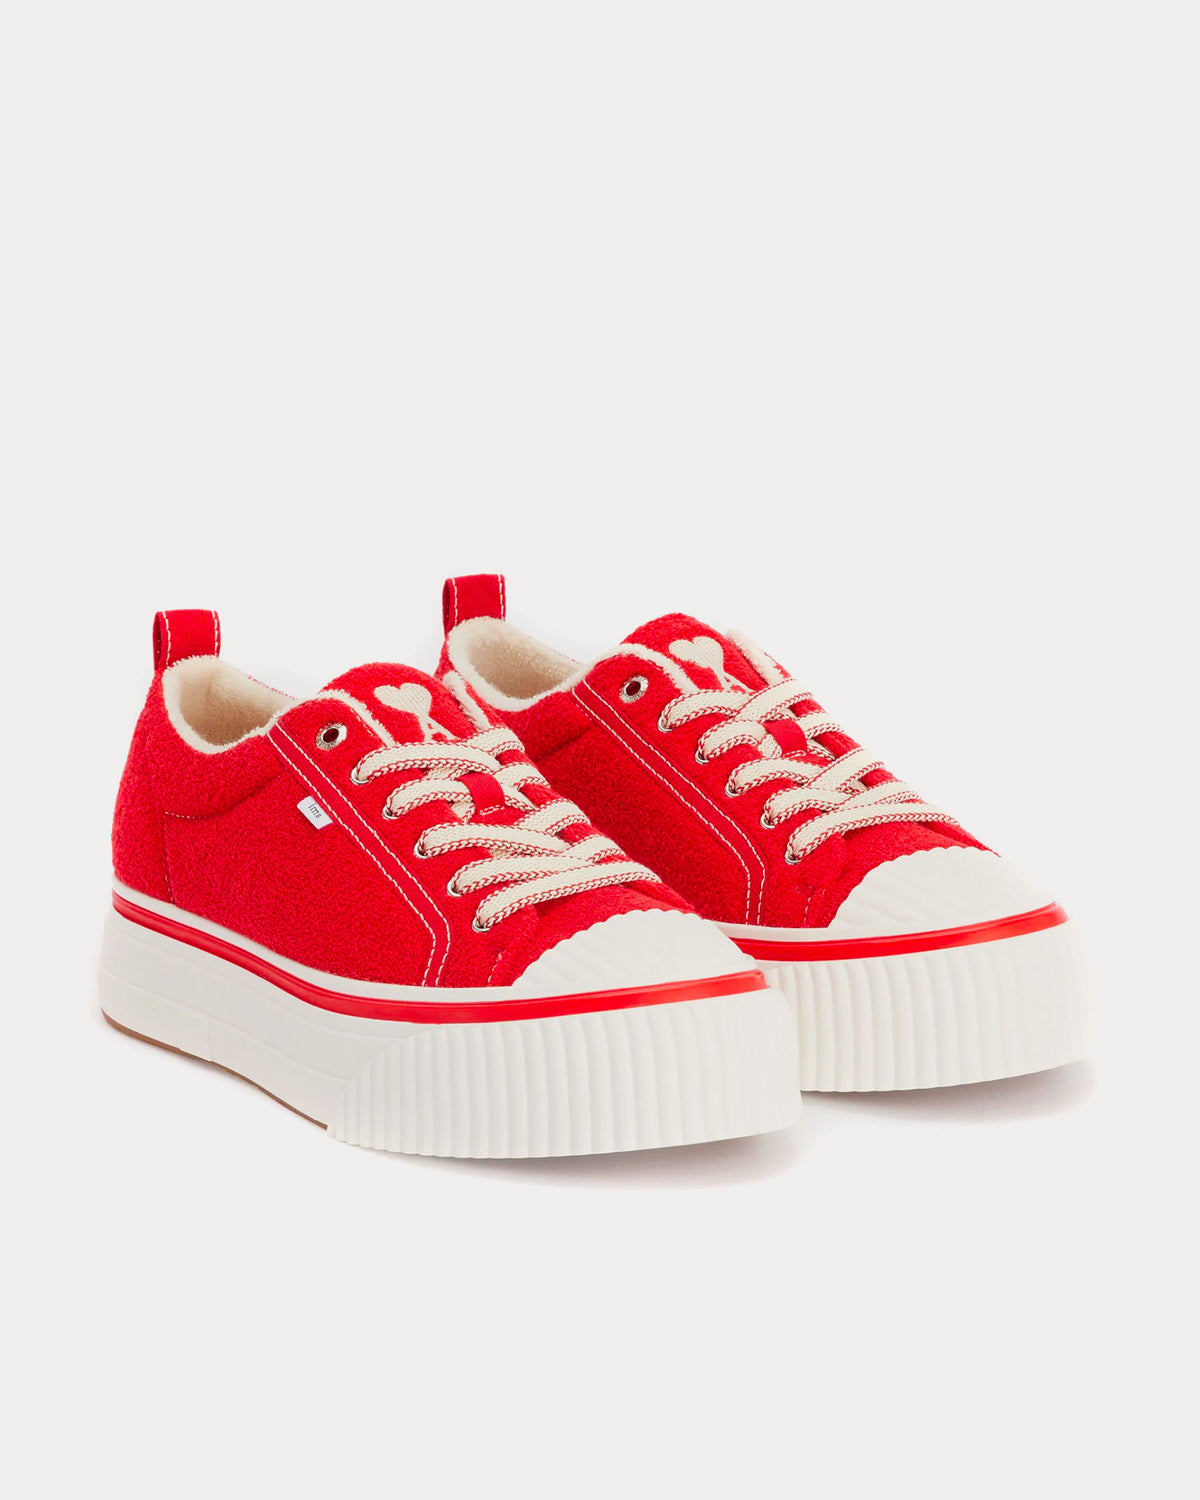 AMI - 1980 Canvas Red Low Top Sneakers